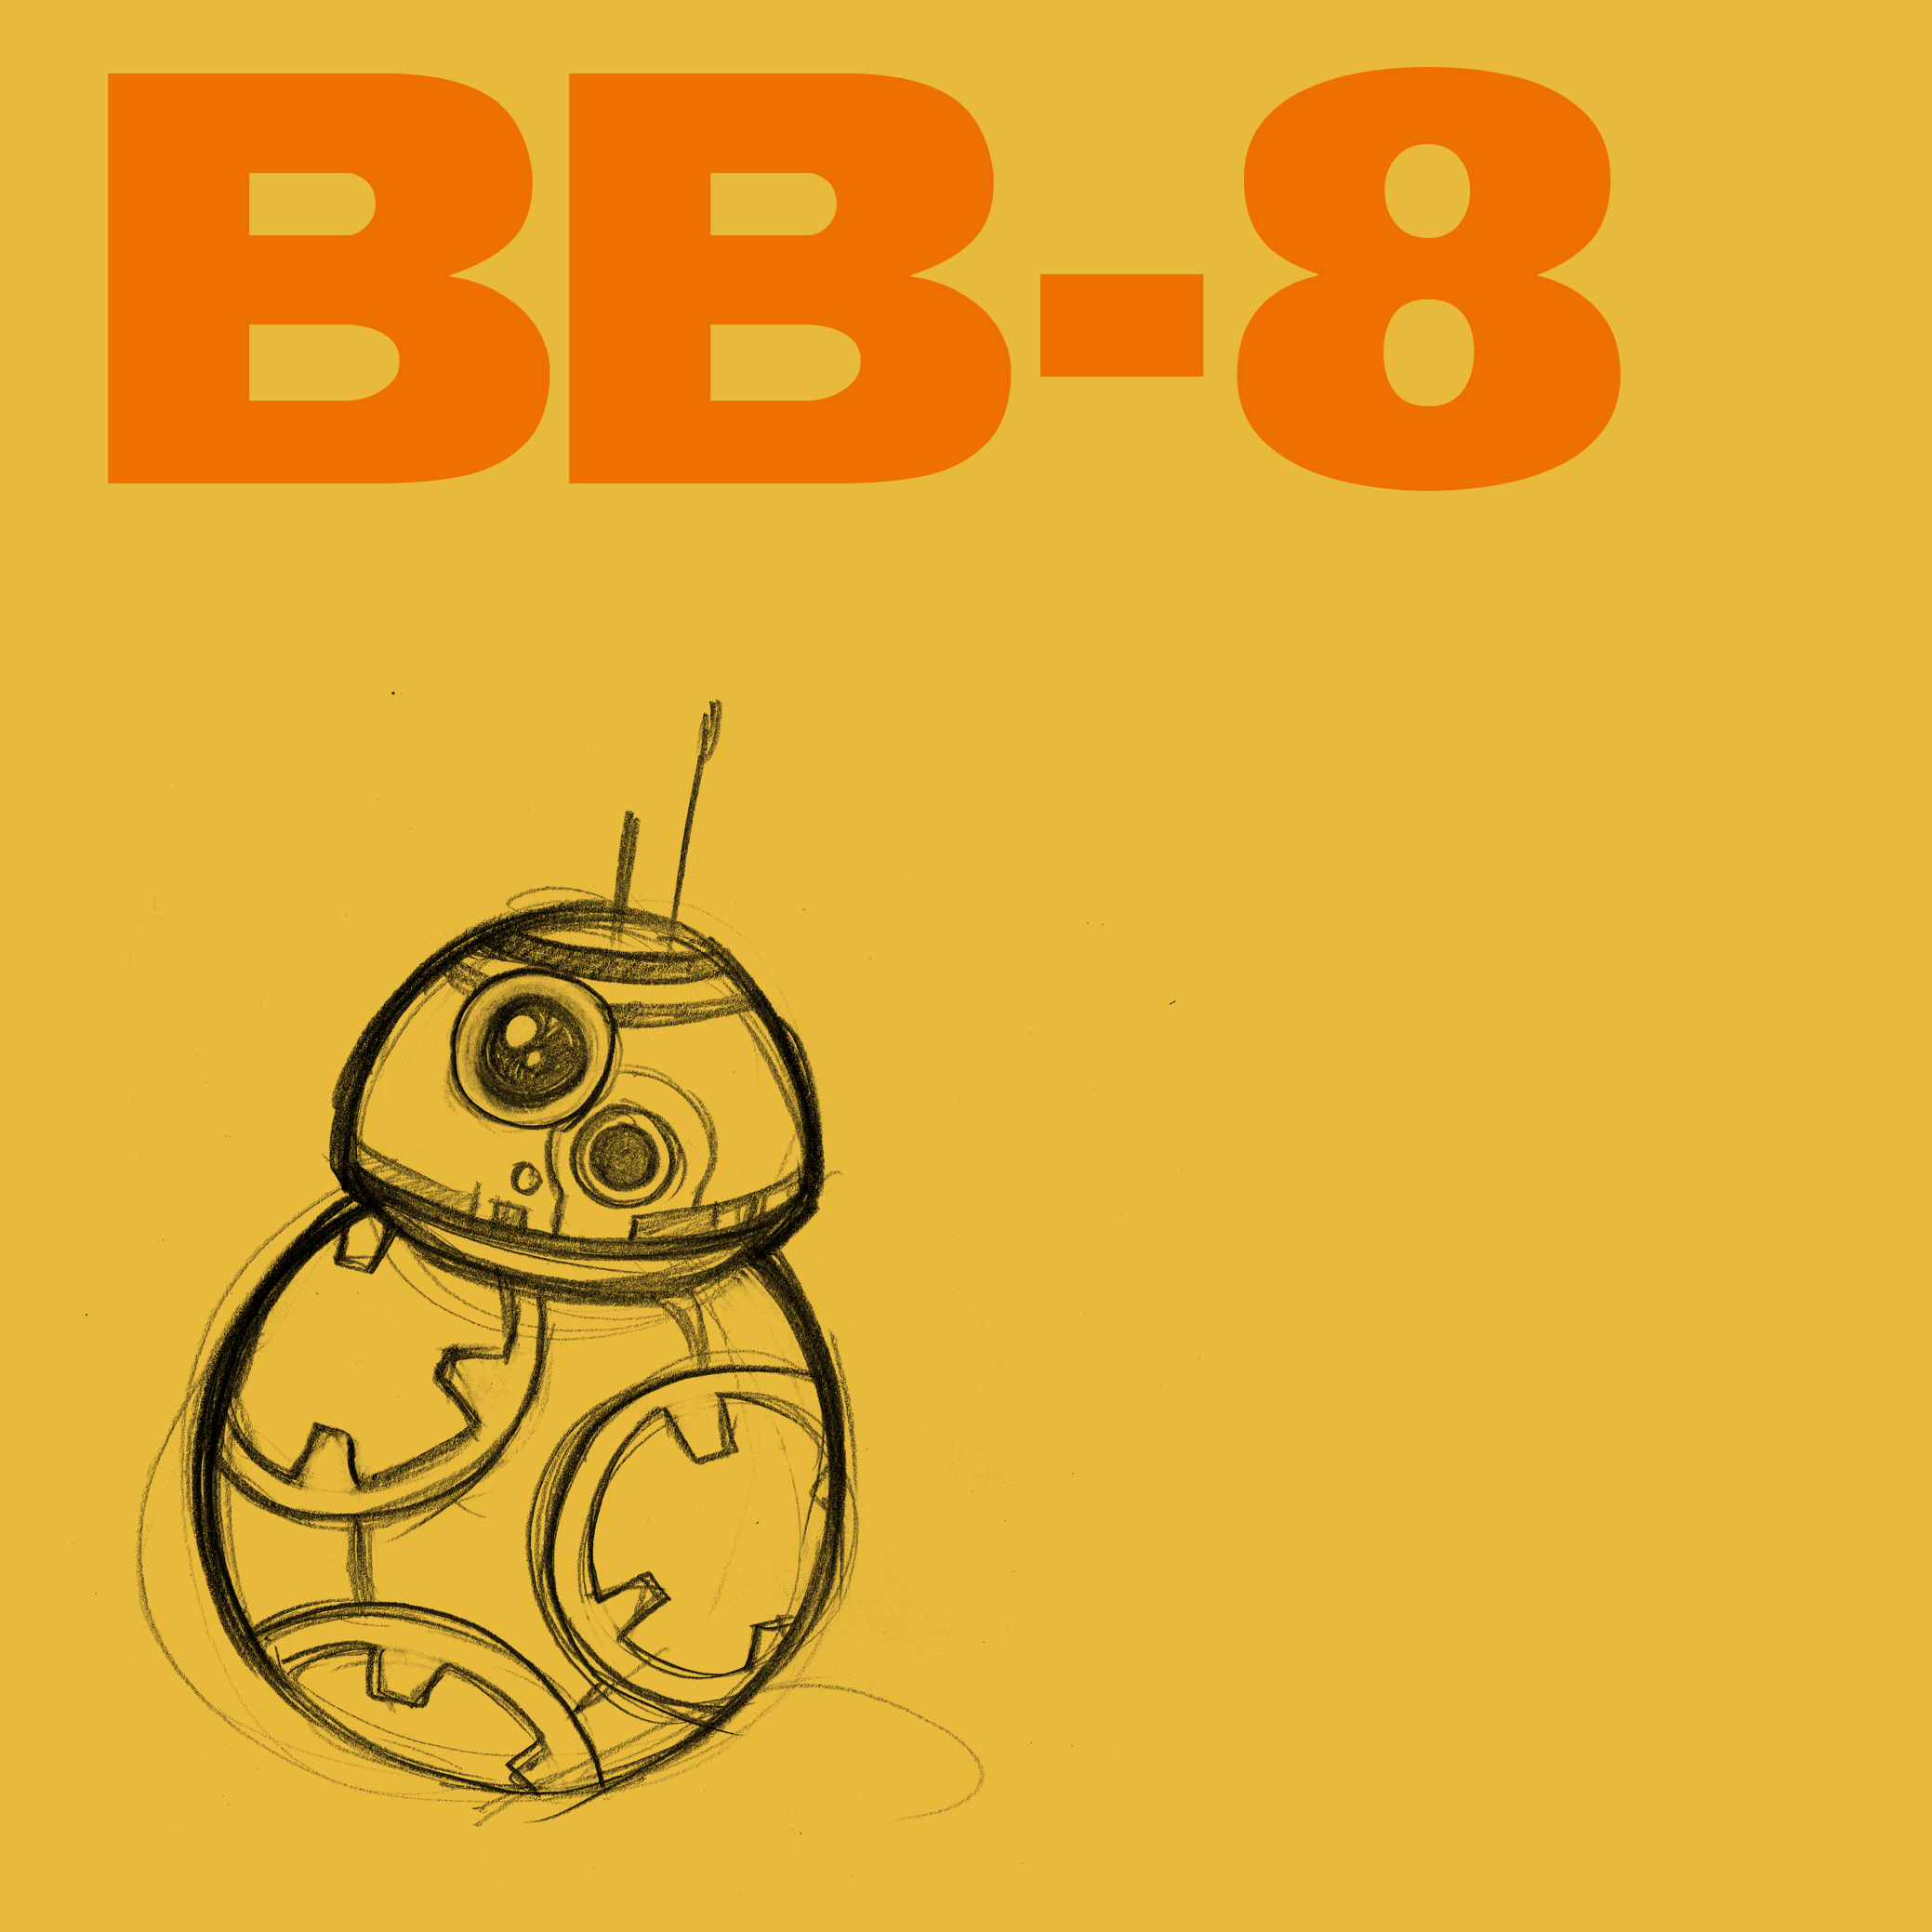 GRAPHIC: BB-8 from "Star Wars: The Force Awakens." Graphic by The Signal Managing Editor Dave Silverio.